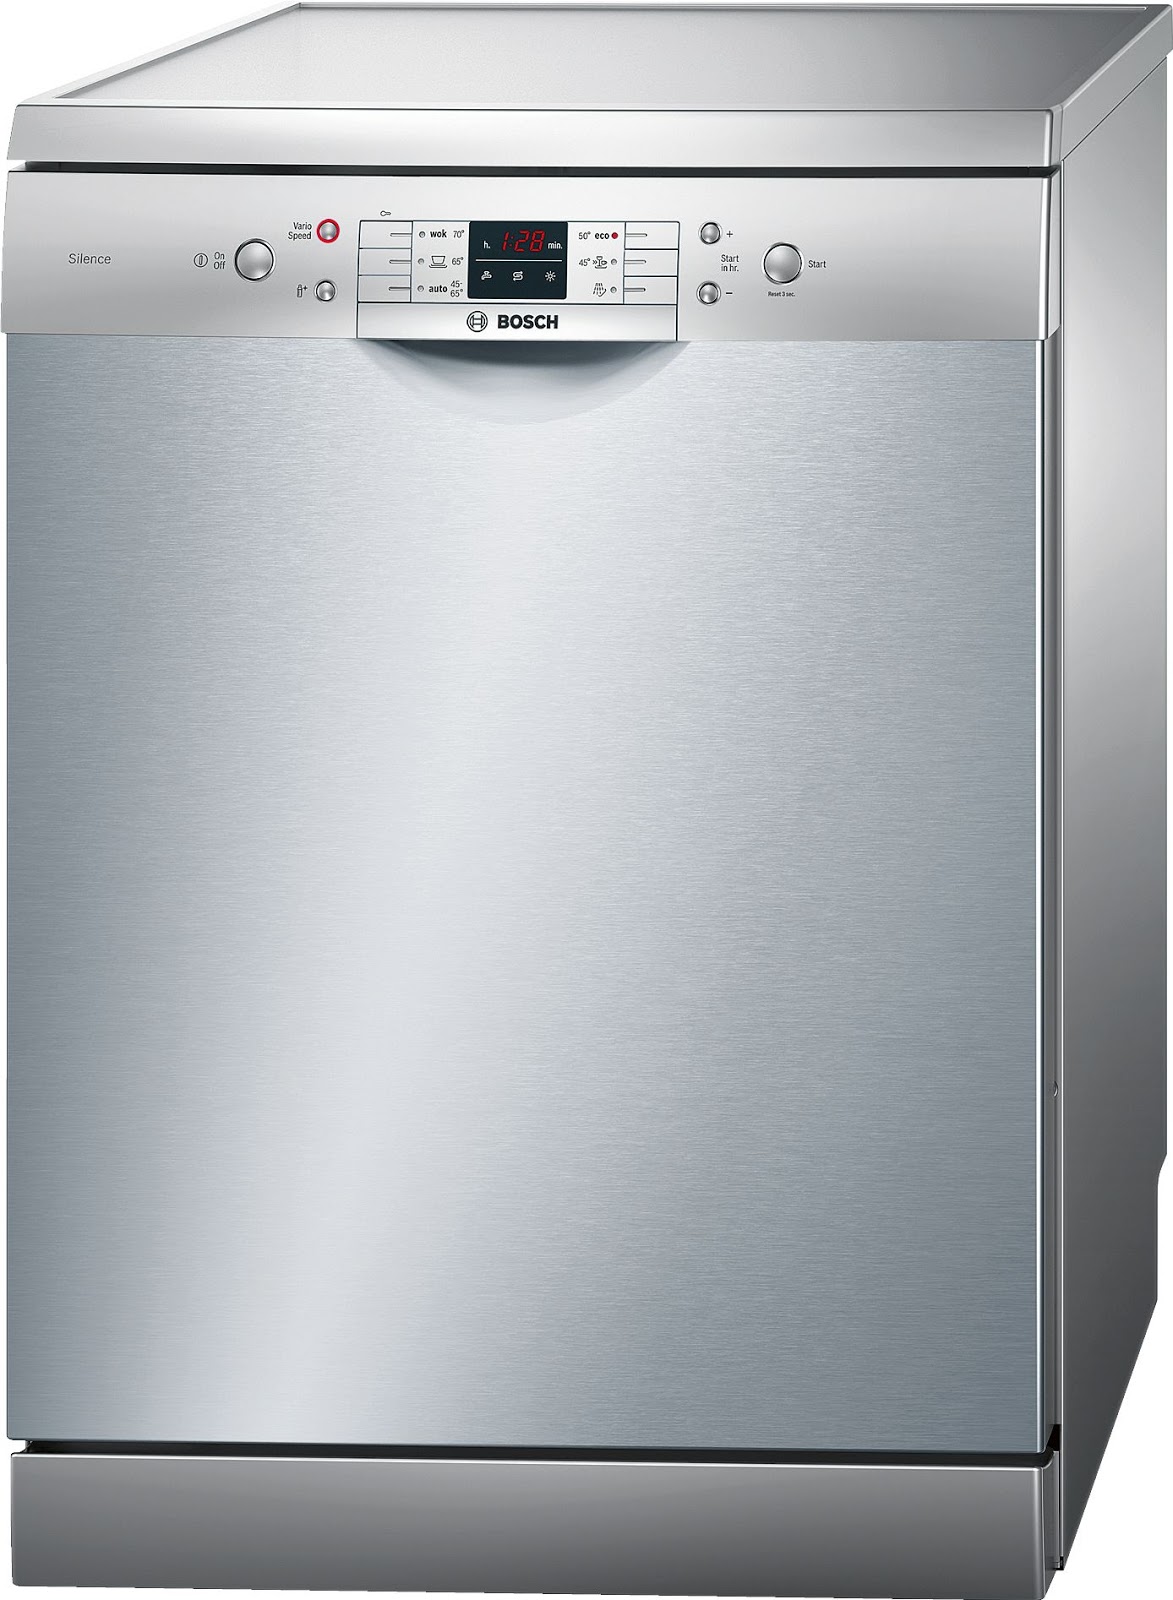 Bosch Faq Common Questions About A Dishwasher Camemberu